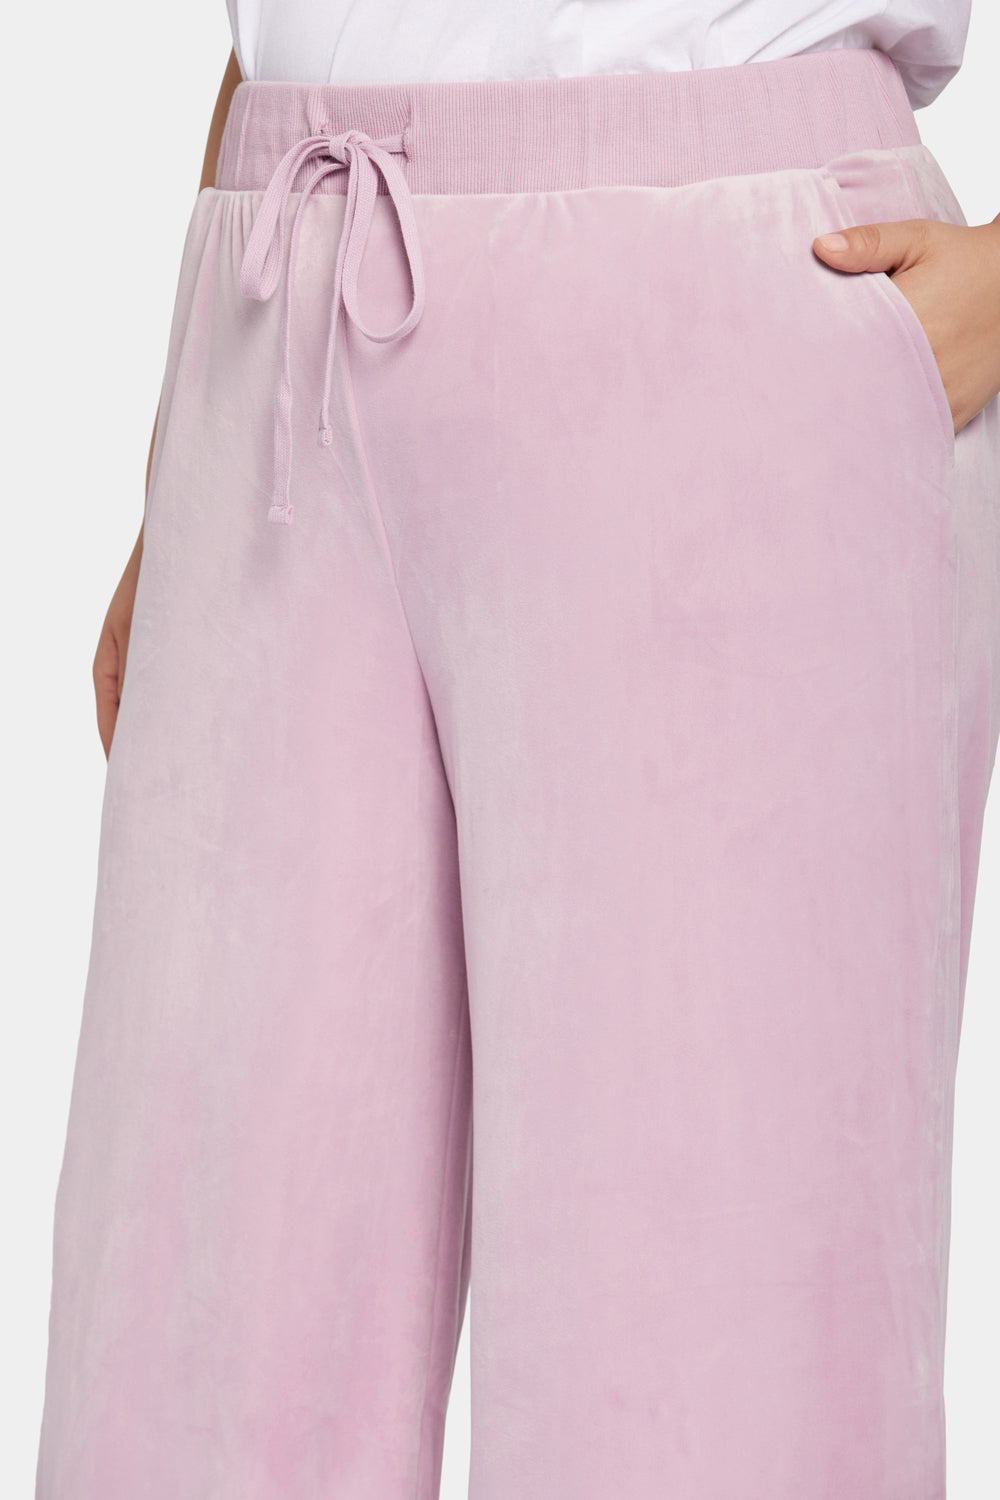 NYDJ Velour Drawstring Wide Leg Pants In Plus Size Forever Comfort™ Collection - Dawn Pink